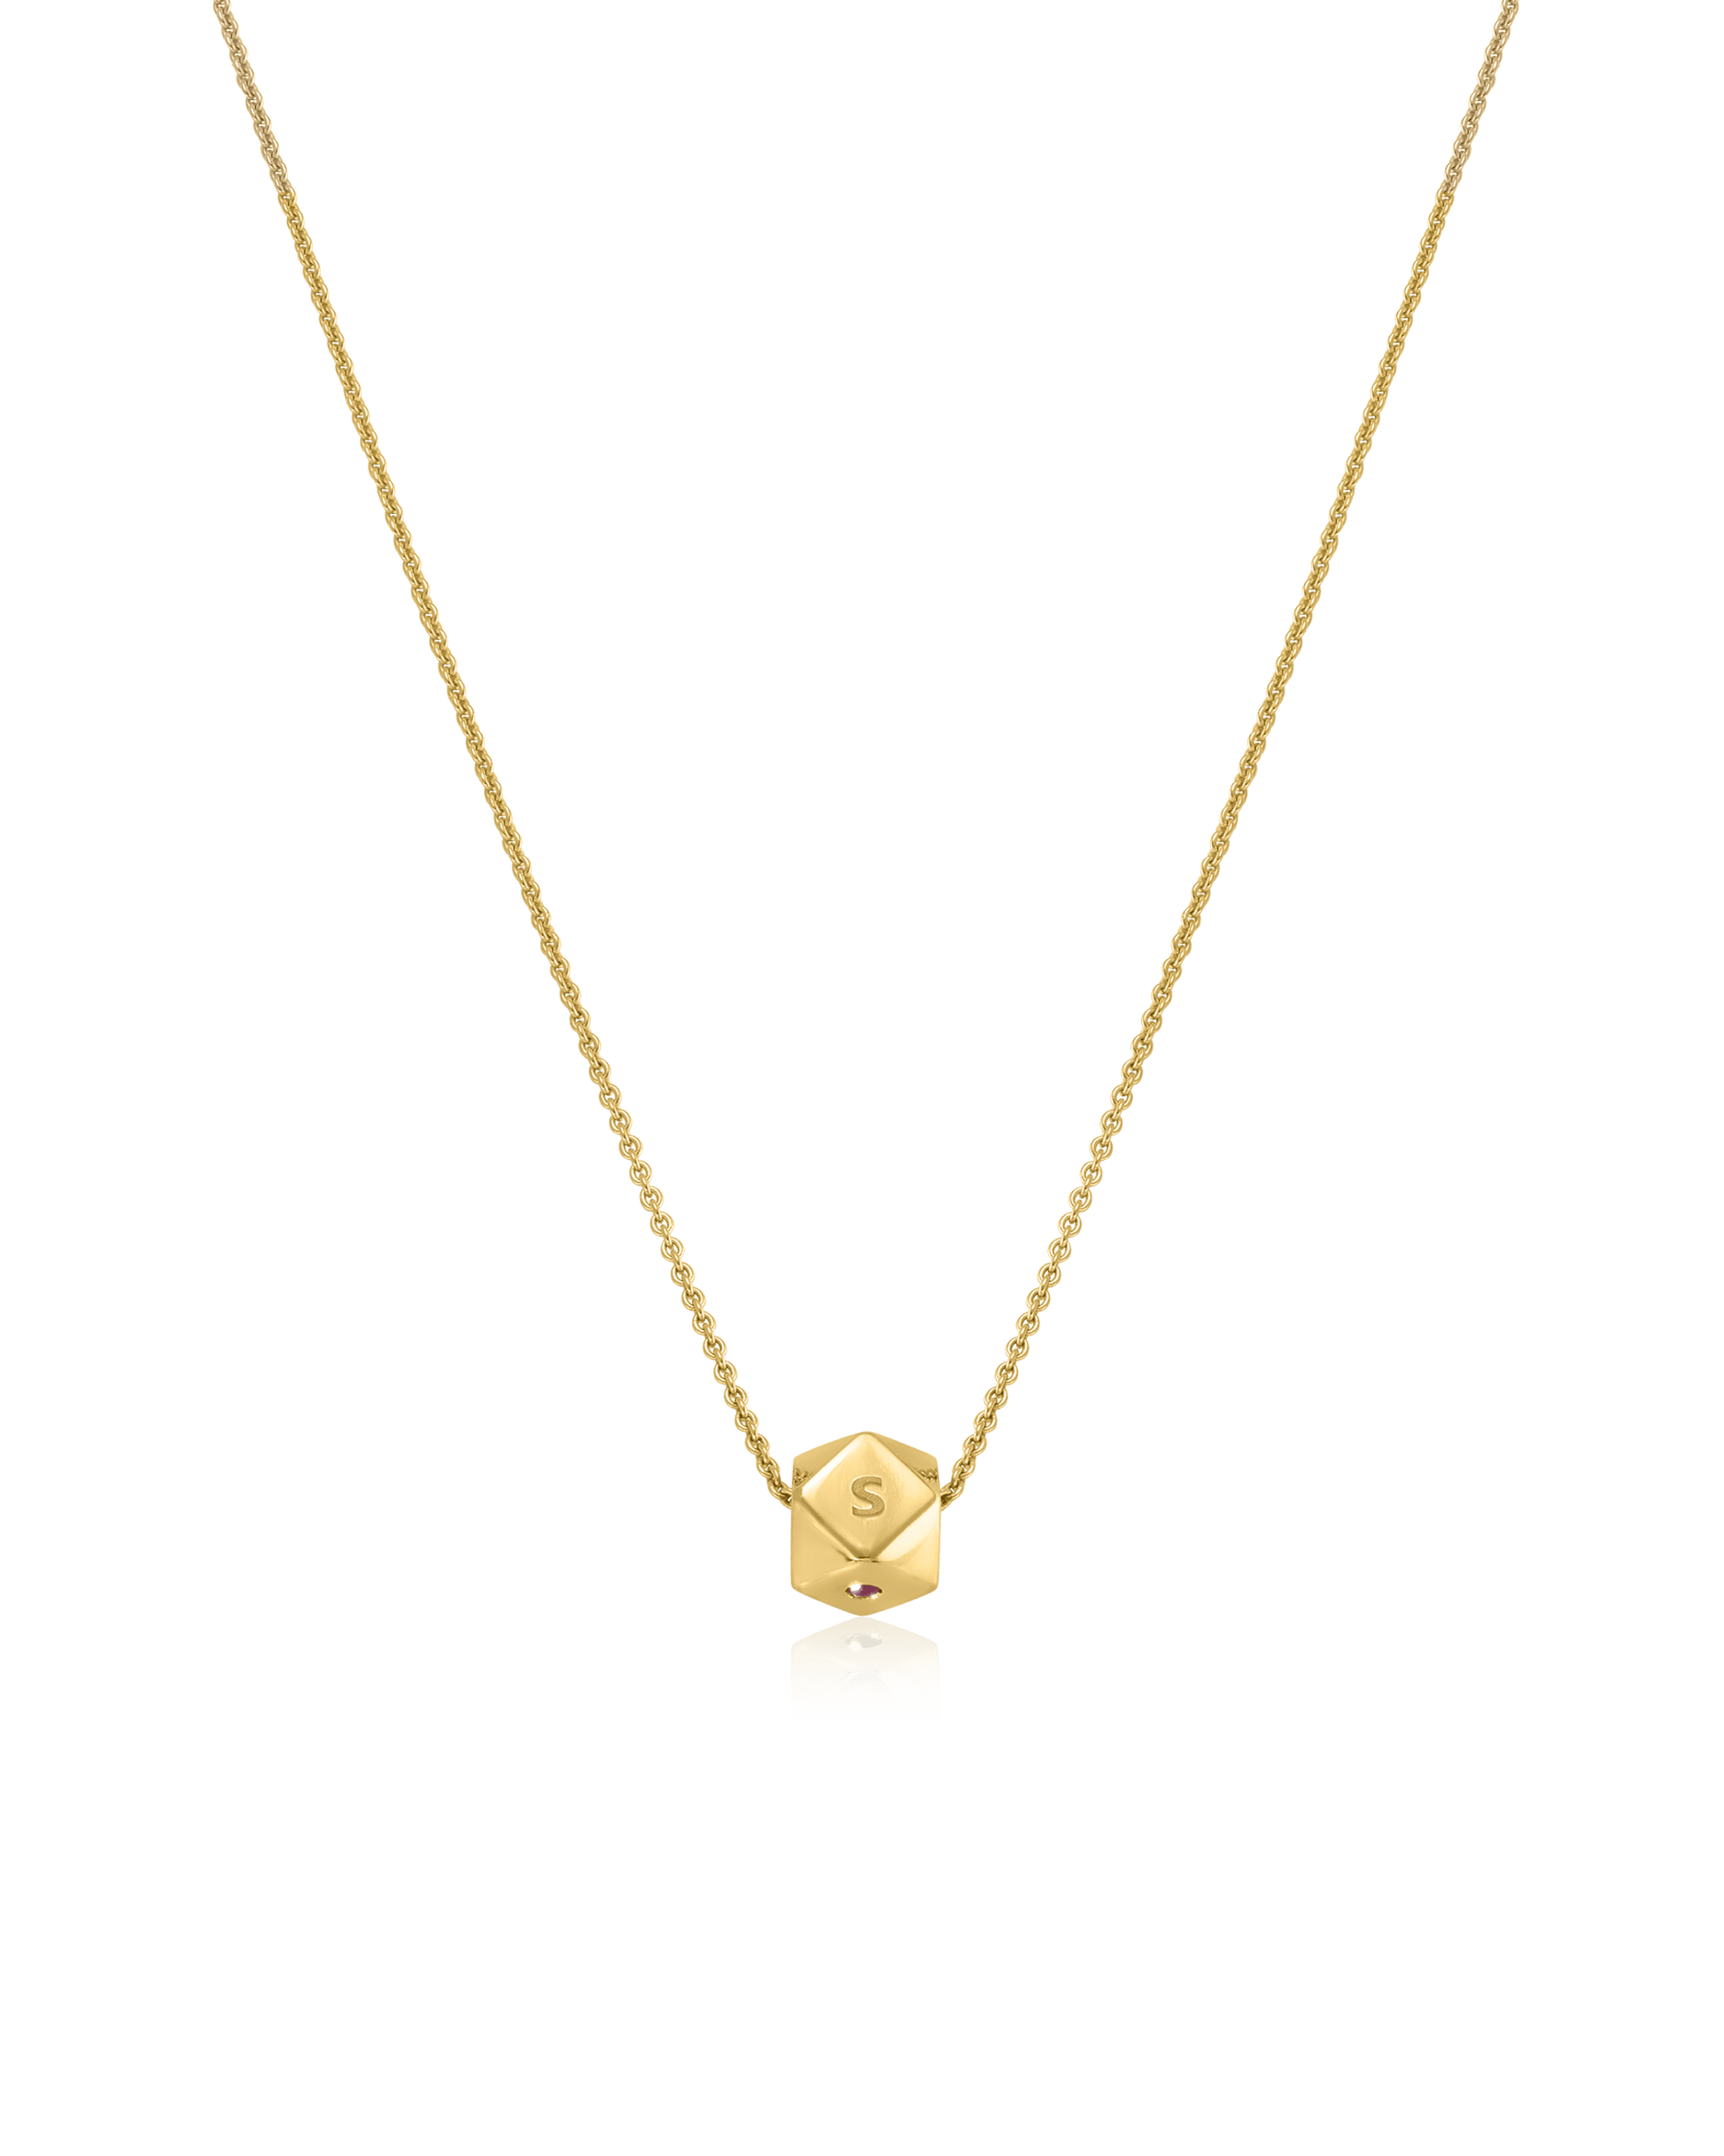 Hedra Necklace - 14K Yellow Gold Necklaces magal-dev 1 Charm 16”+2” extender 